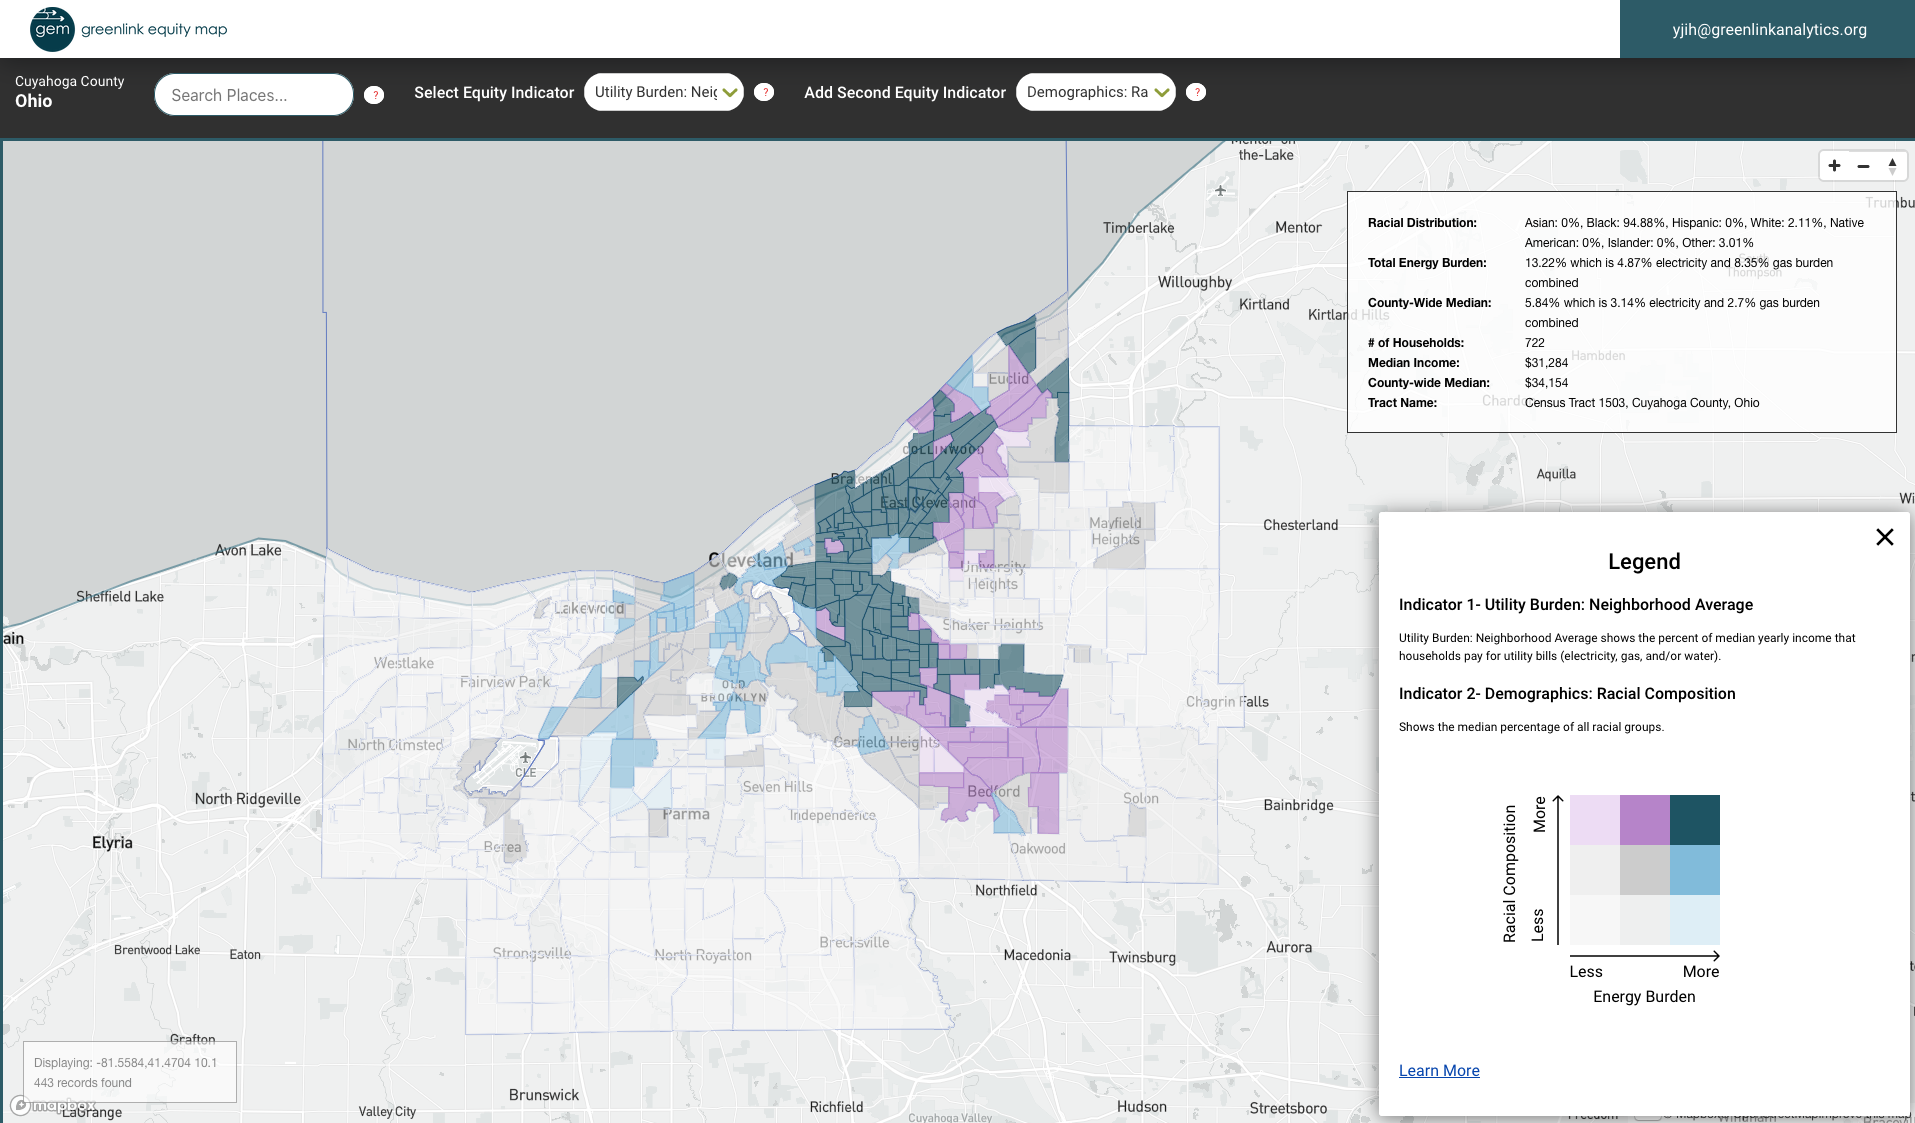 The view of energy burden in predominantly Black communities in Cleveland.